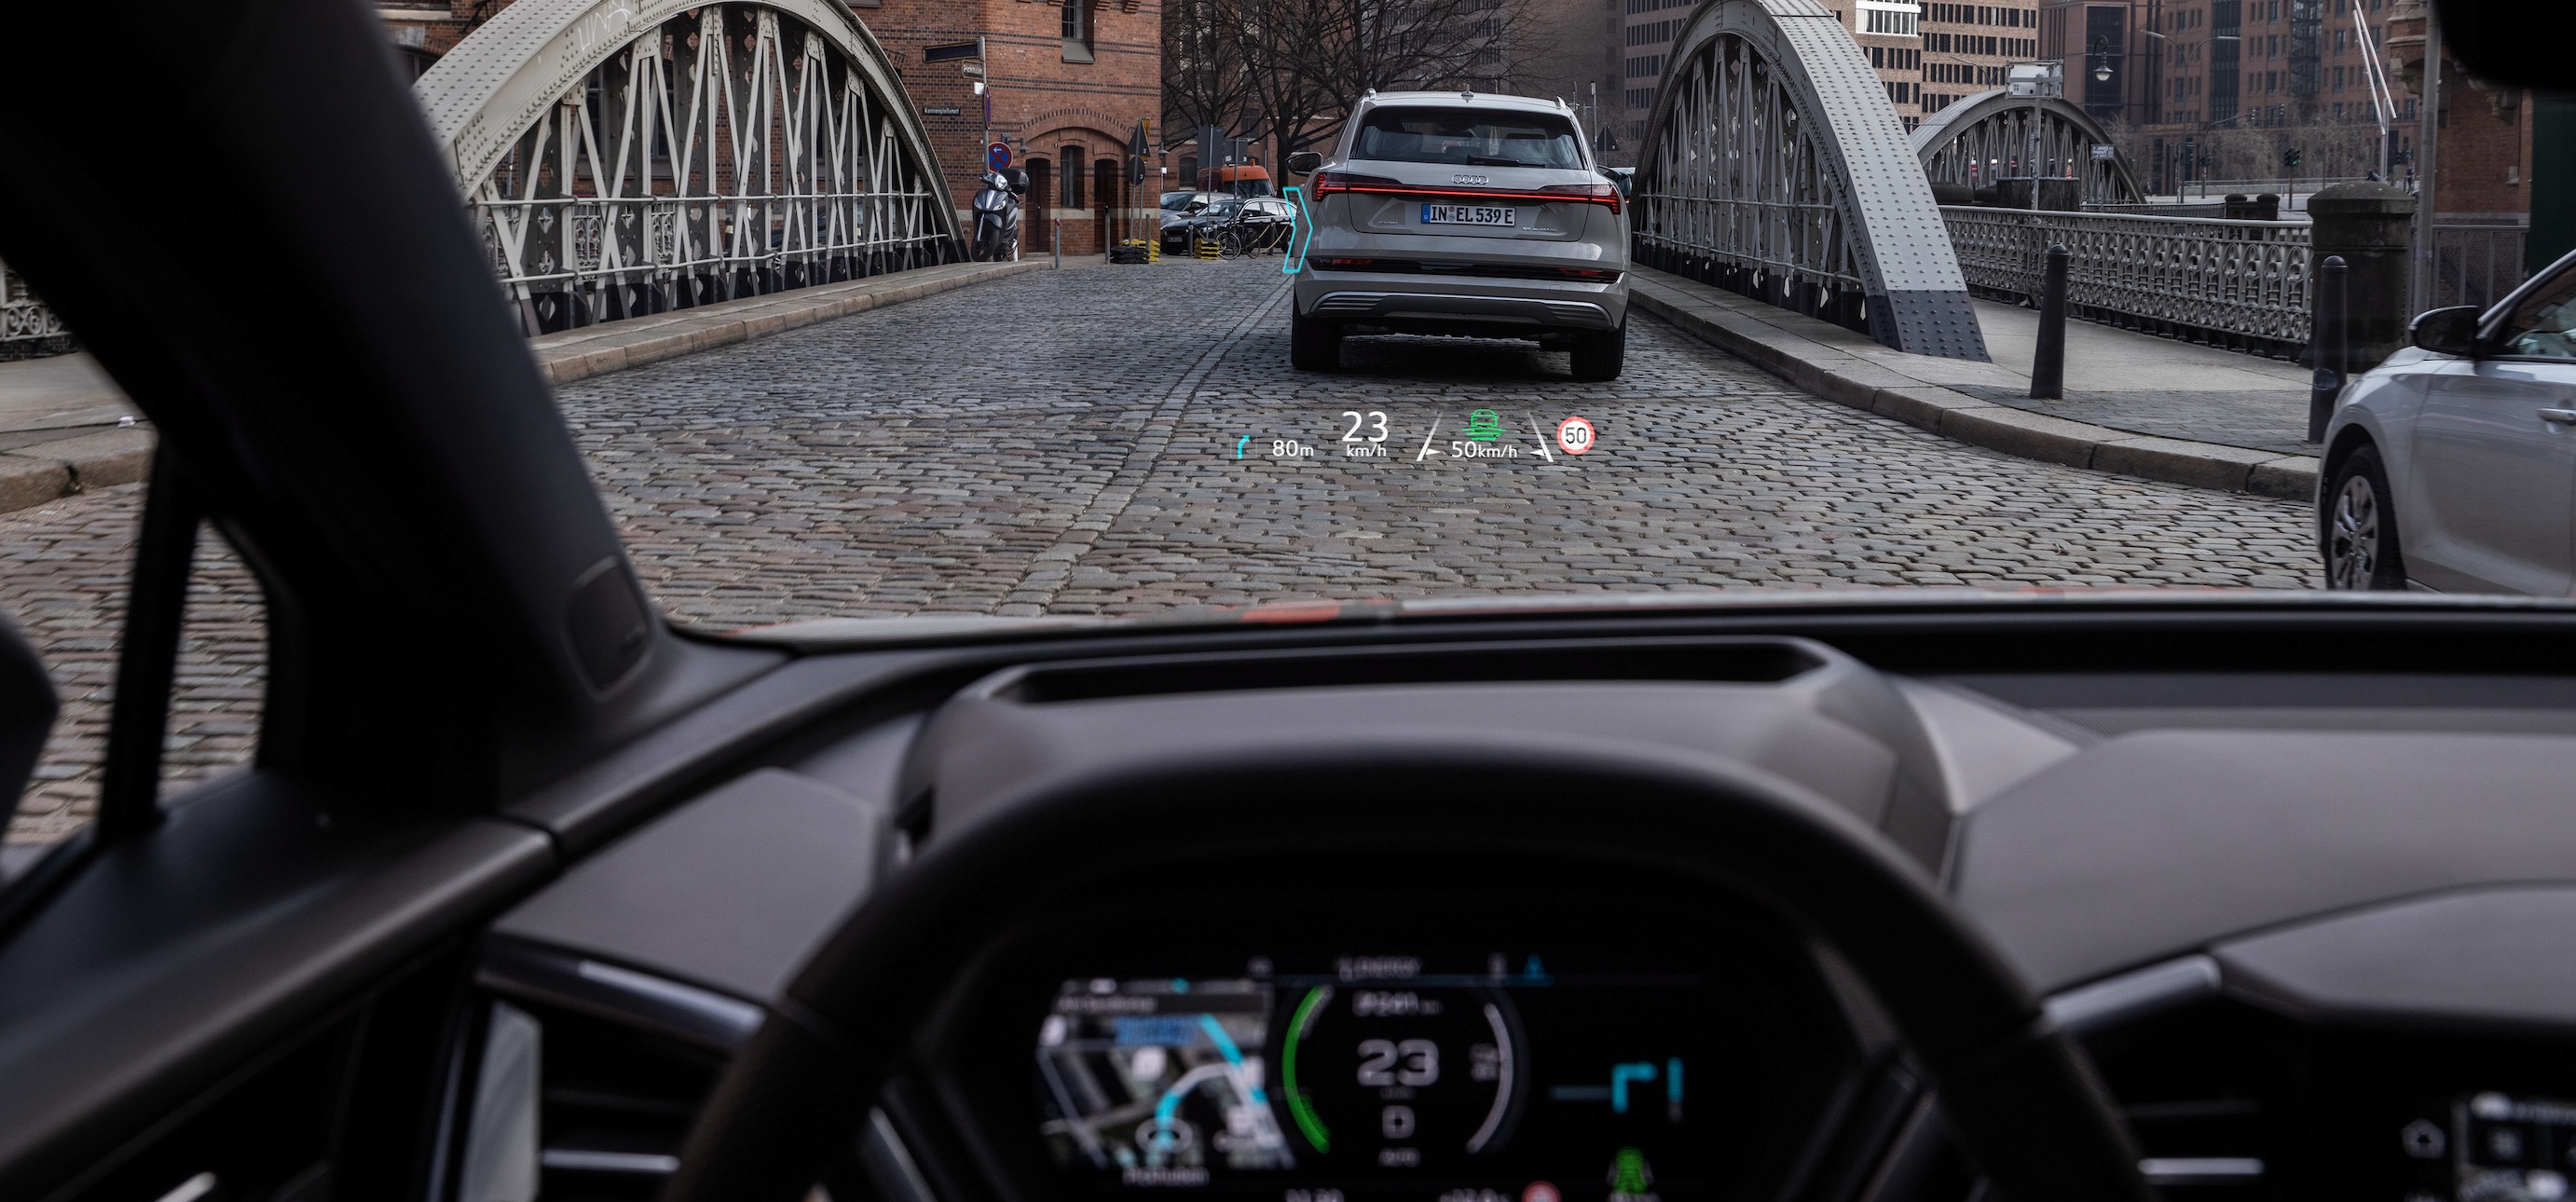 Audi unveils the interior of the Q4 e-tron electric SUV with impressive  head-up display, and more